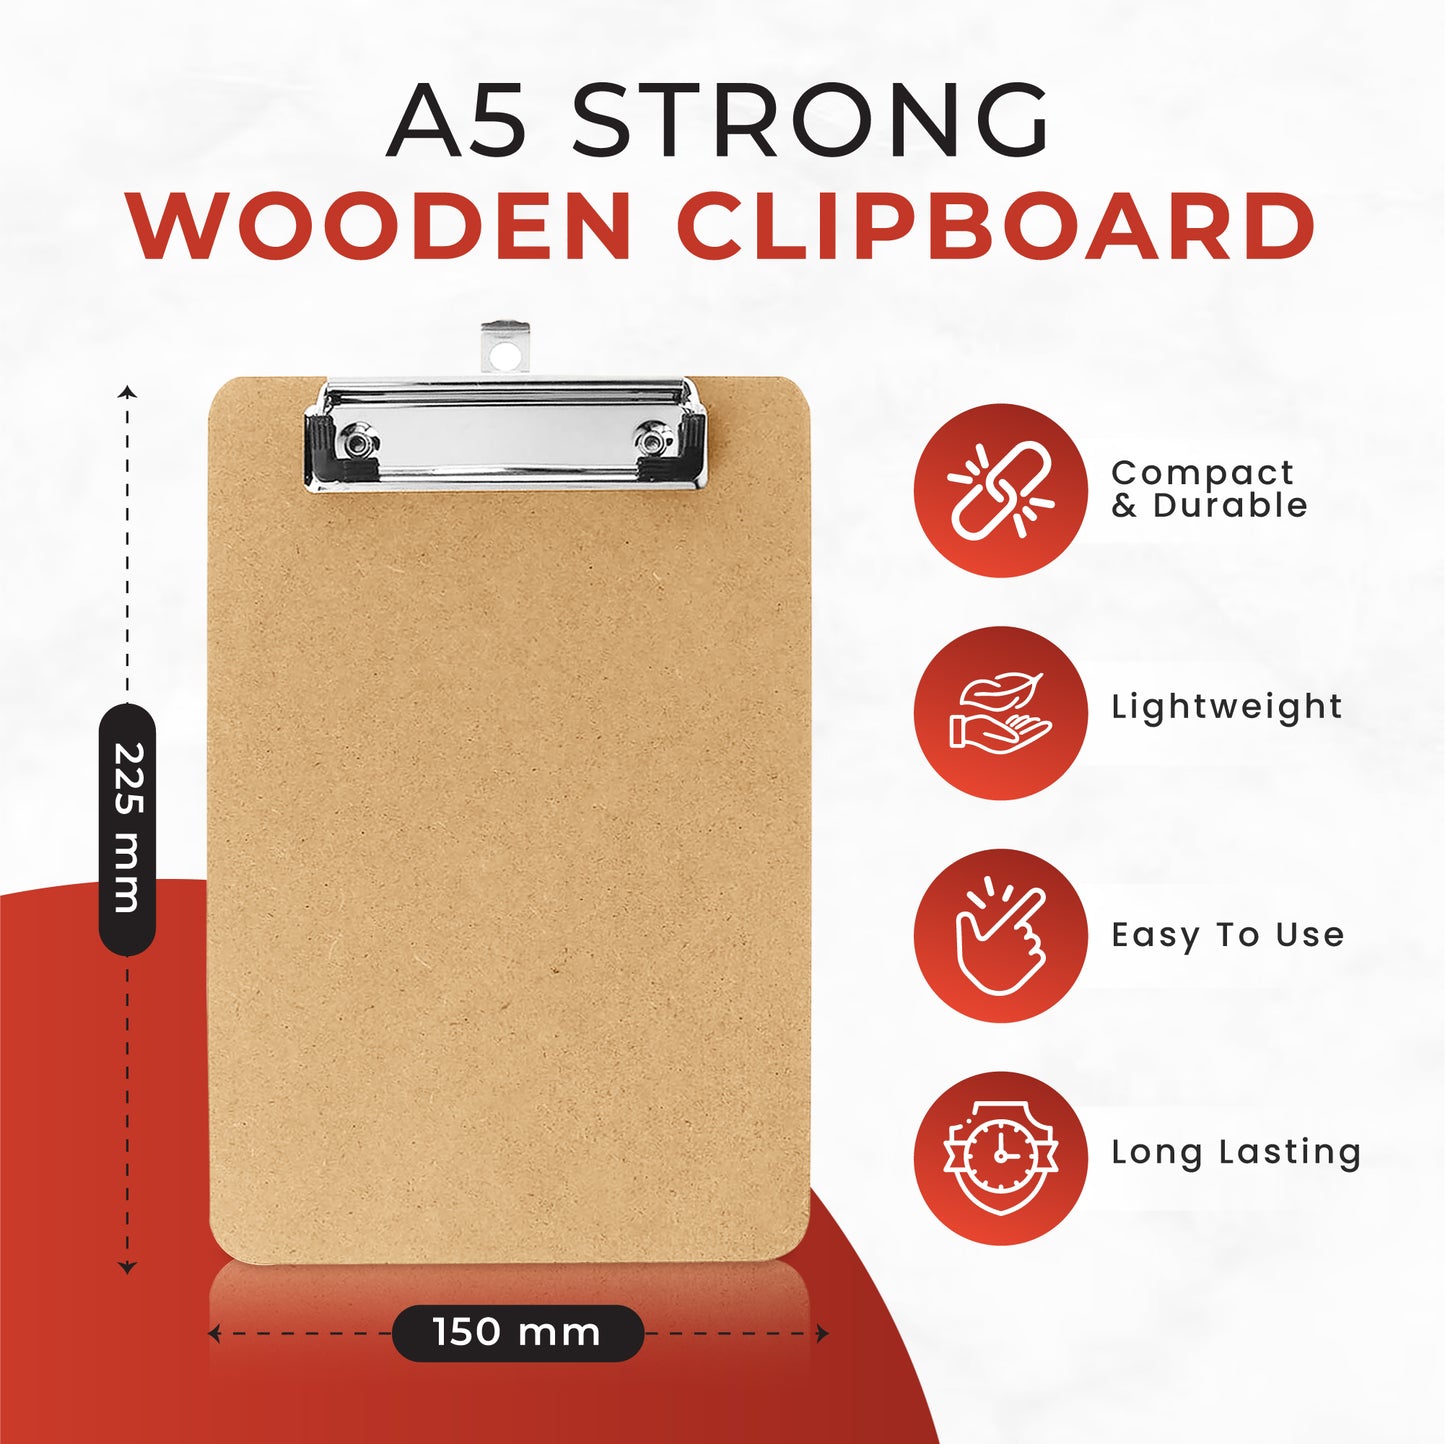 Pack of 10 A5 Quality Wooden Clipboard with Hanging Hole